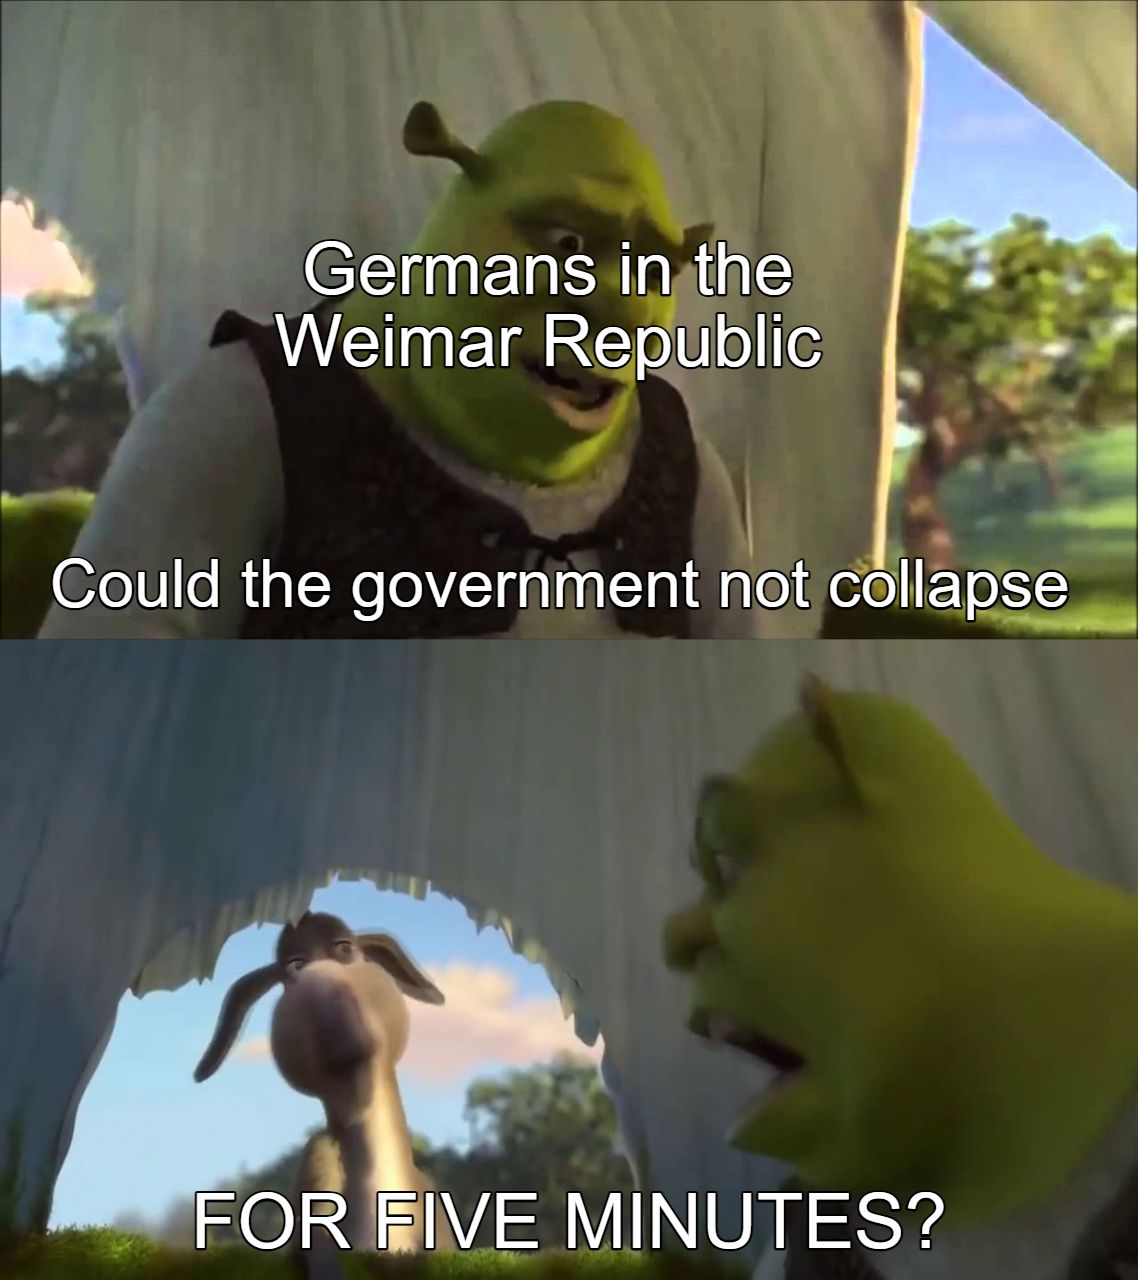 Lasting 3 years as Chancellor in the Weimar Republic was considered a long time